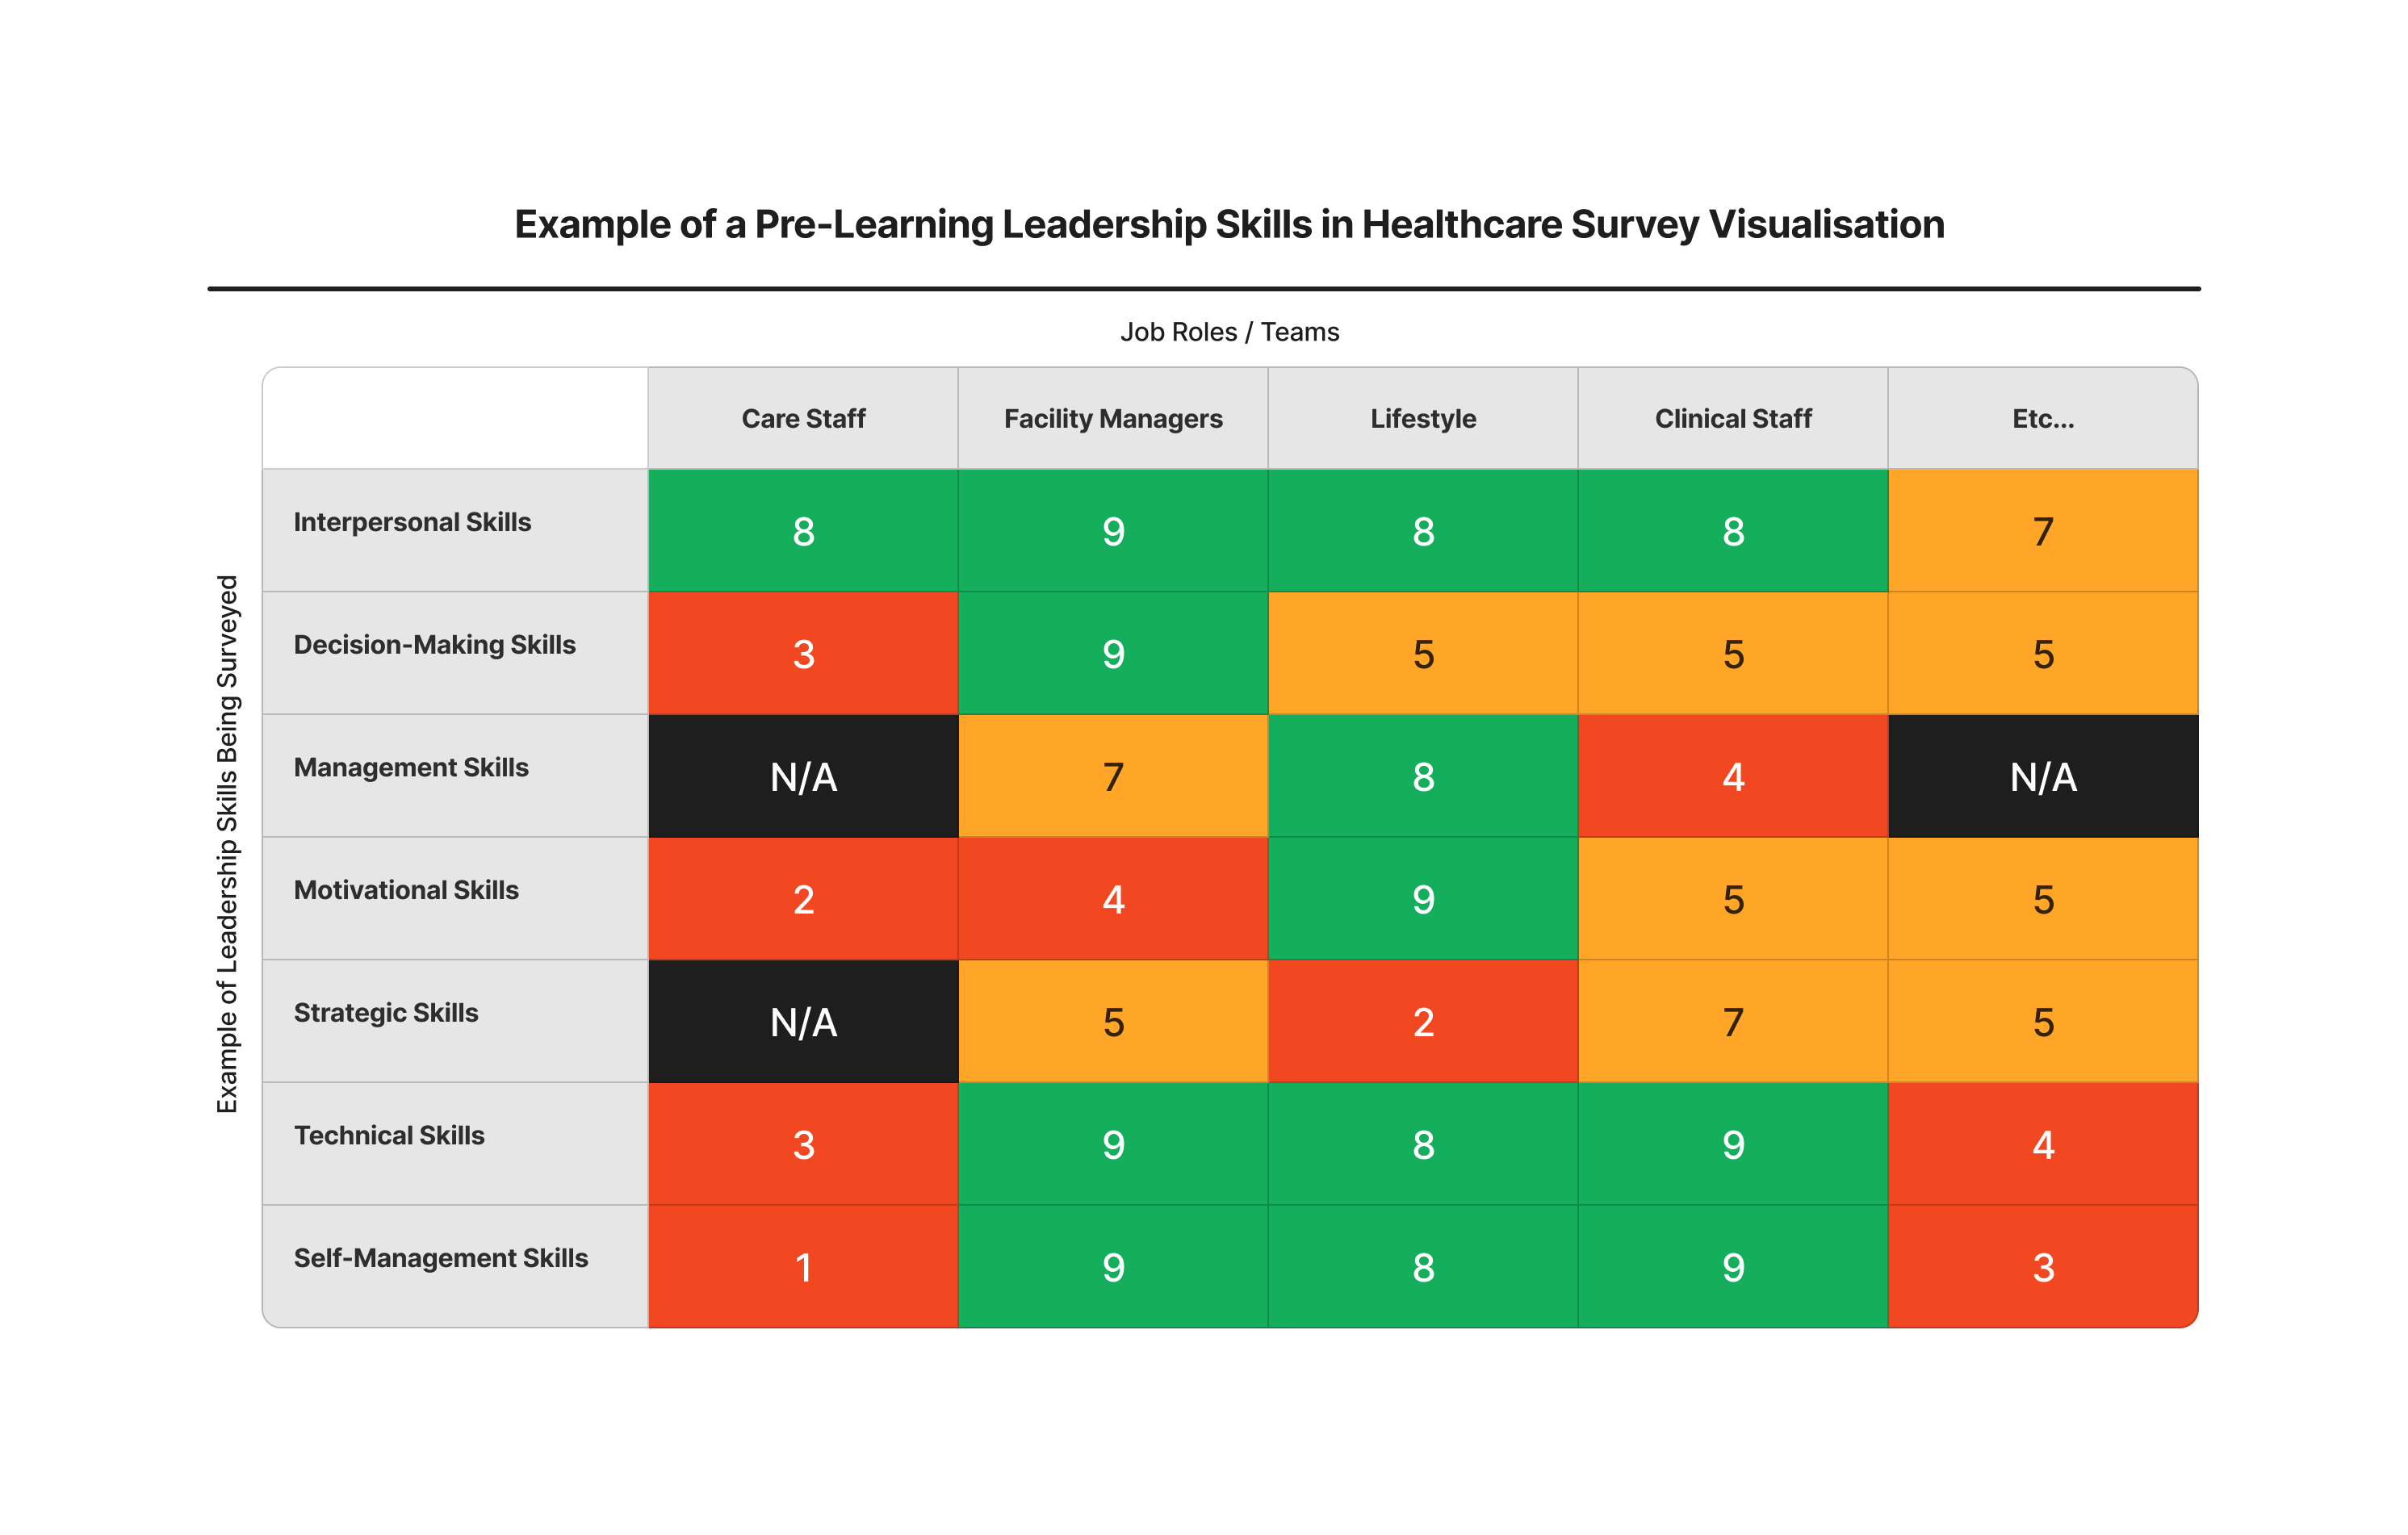 Example of Pre-learning leadership skills in healthcare (survey data visualisation)